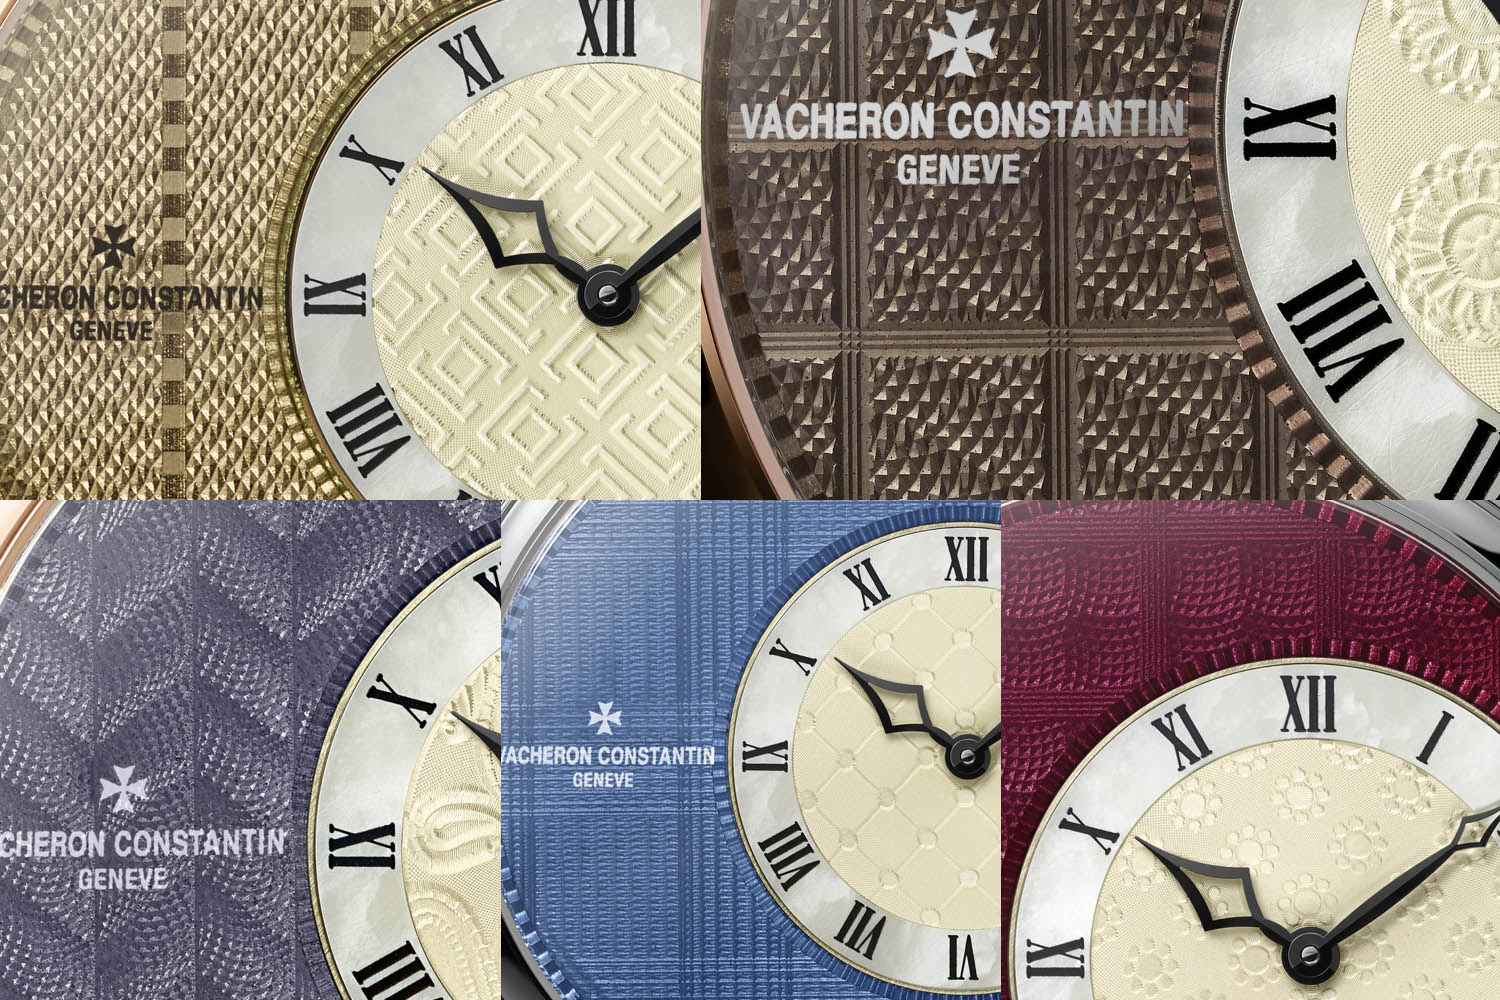 Execllent Vacheron Constantin Replica Metiers d’Art Classiness Sartoriale, Inspired From The Typical Masculine Clothing